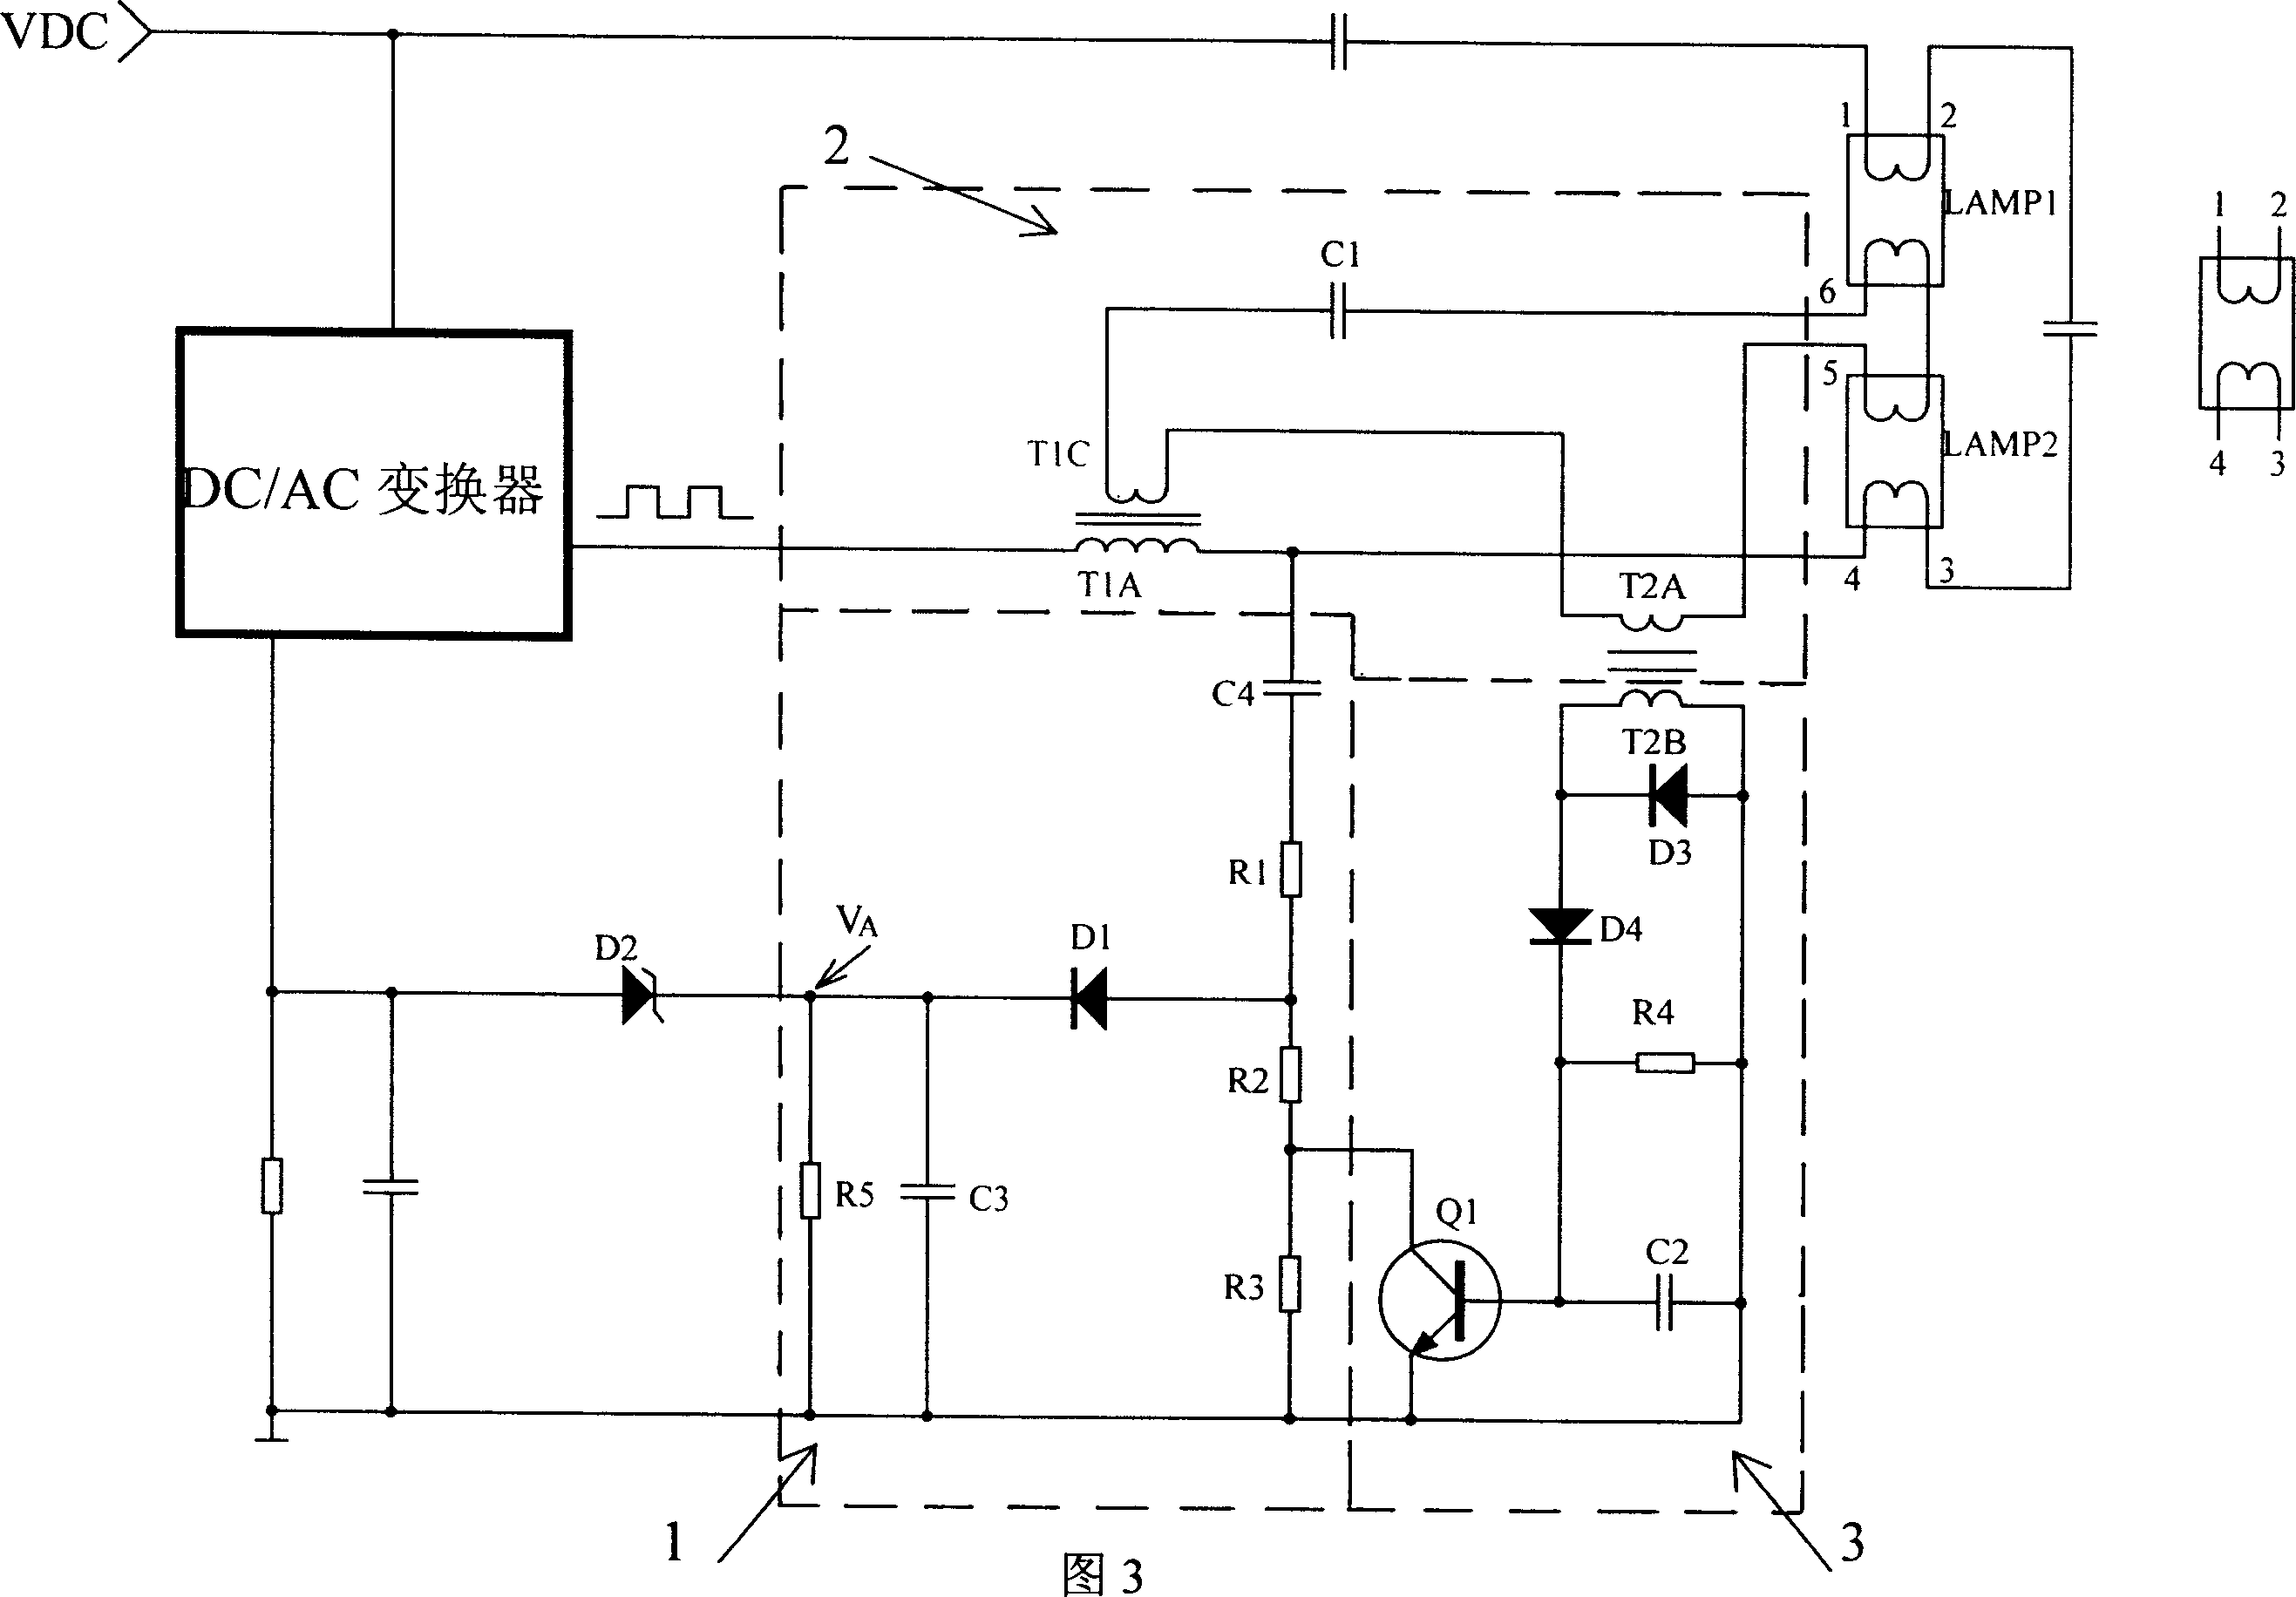 Automatic detecting and compensating circuit for single and double lamps